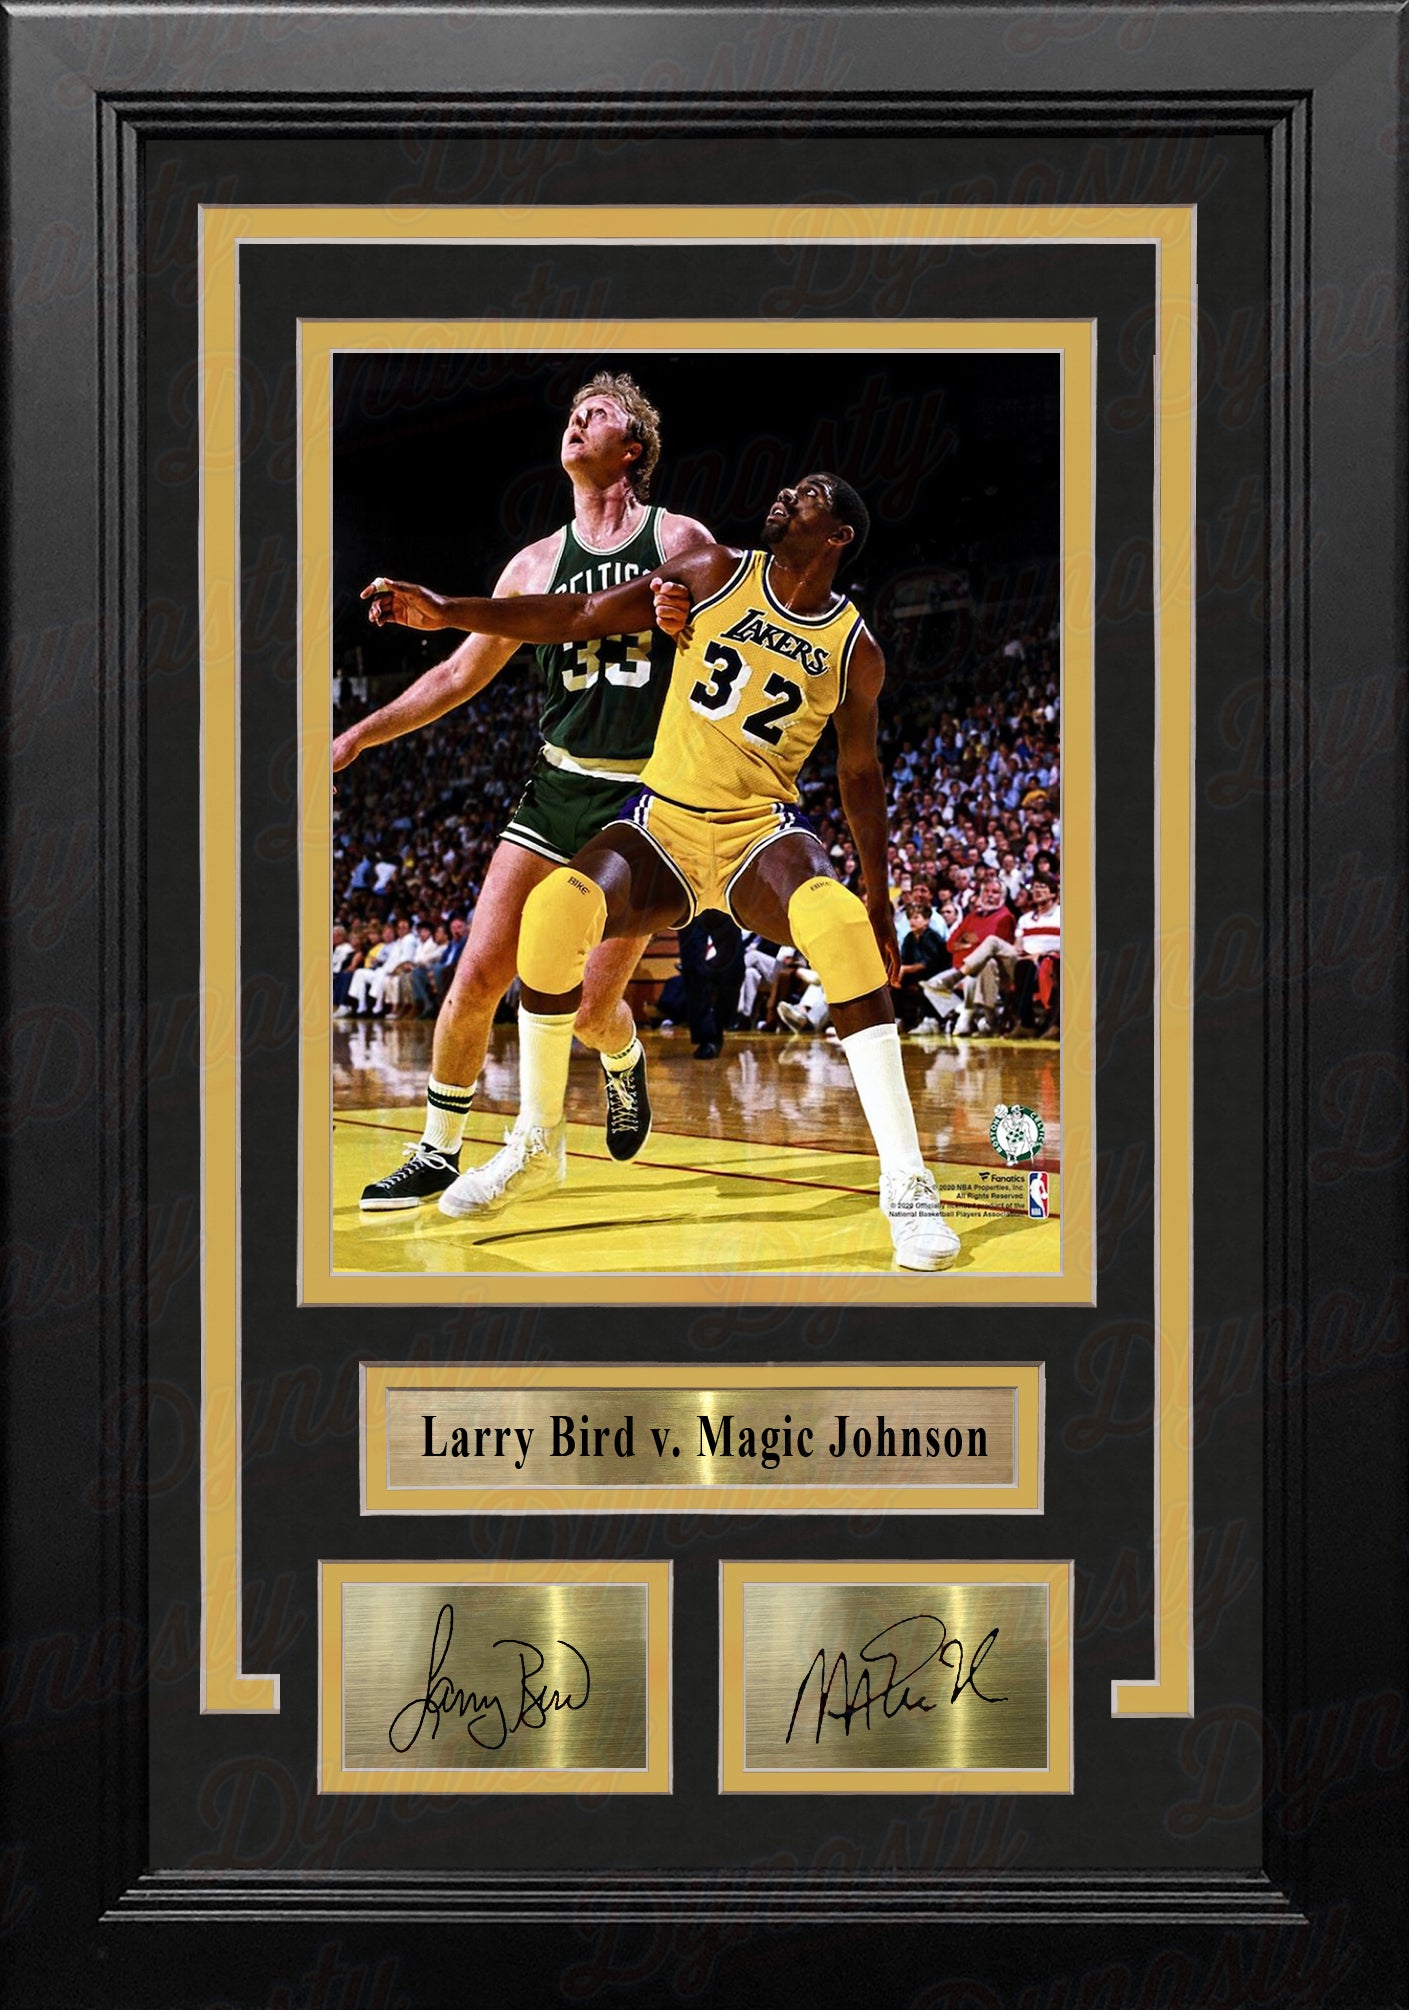 Sold at Auction: Magic Johnson and Larry Bird autographed basketball.